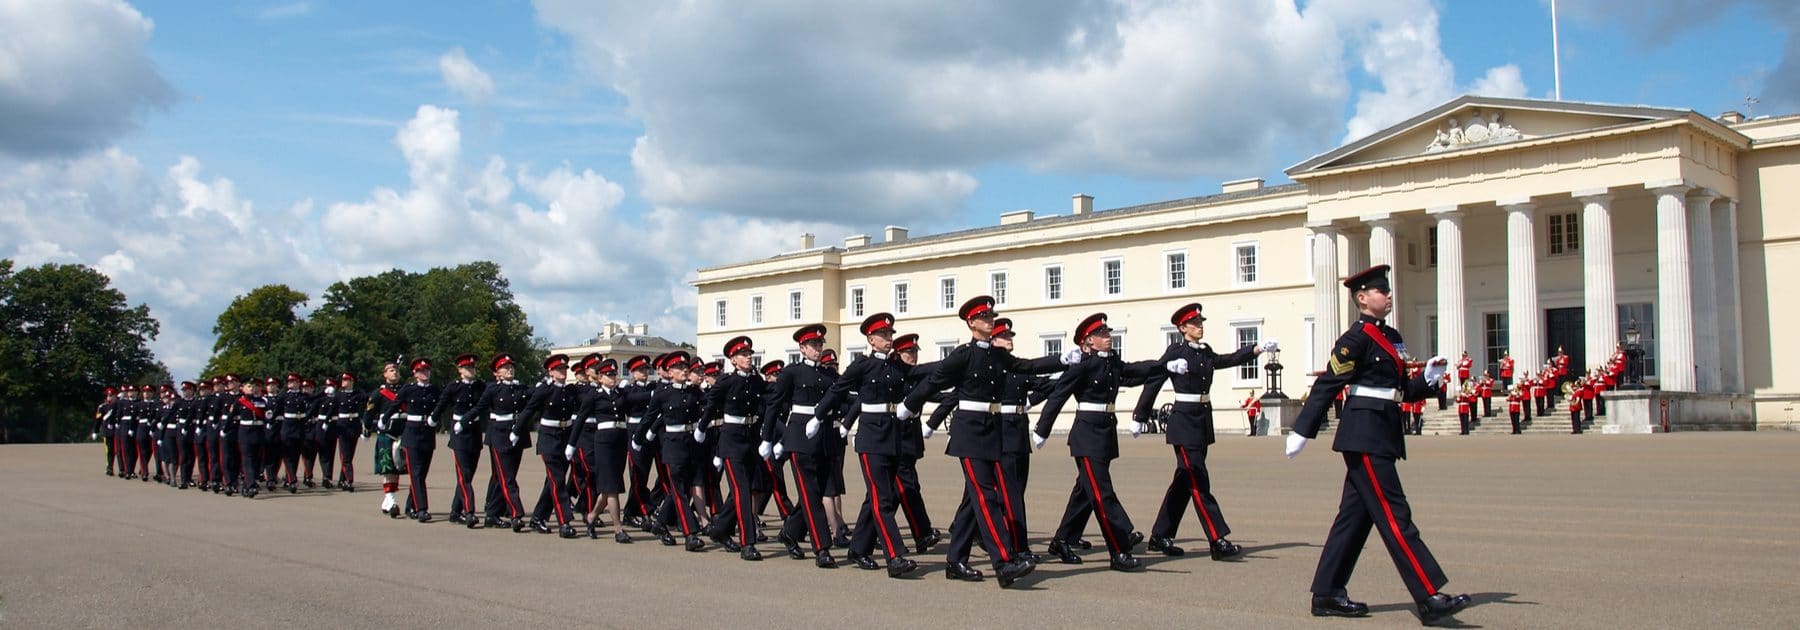 Two ex-cadets win places at Sandhurst